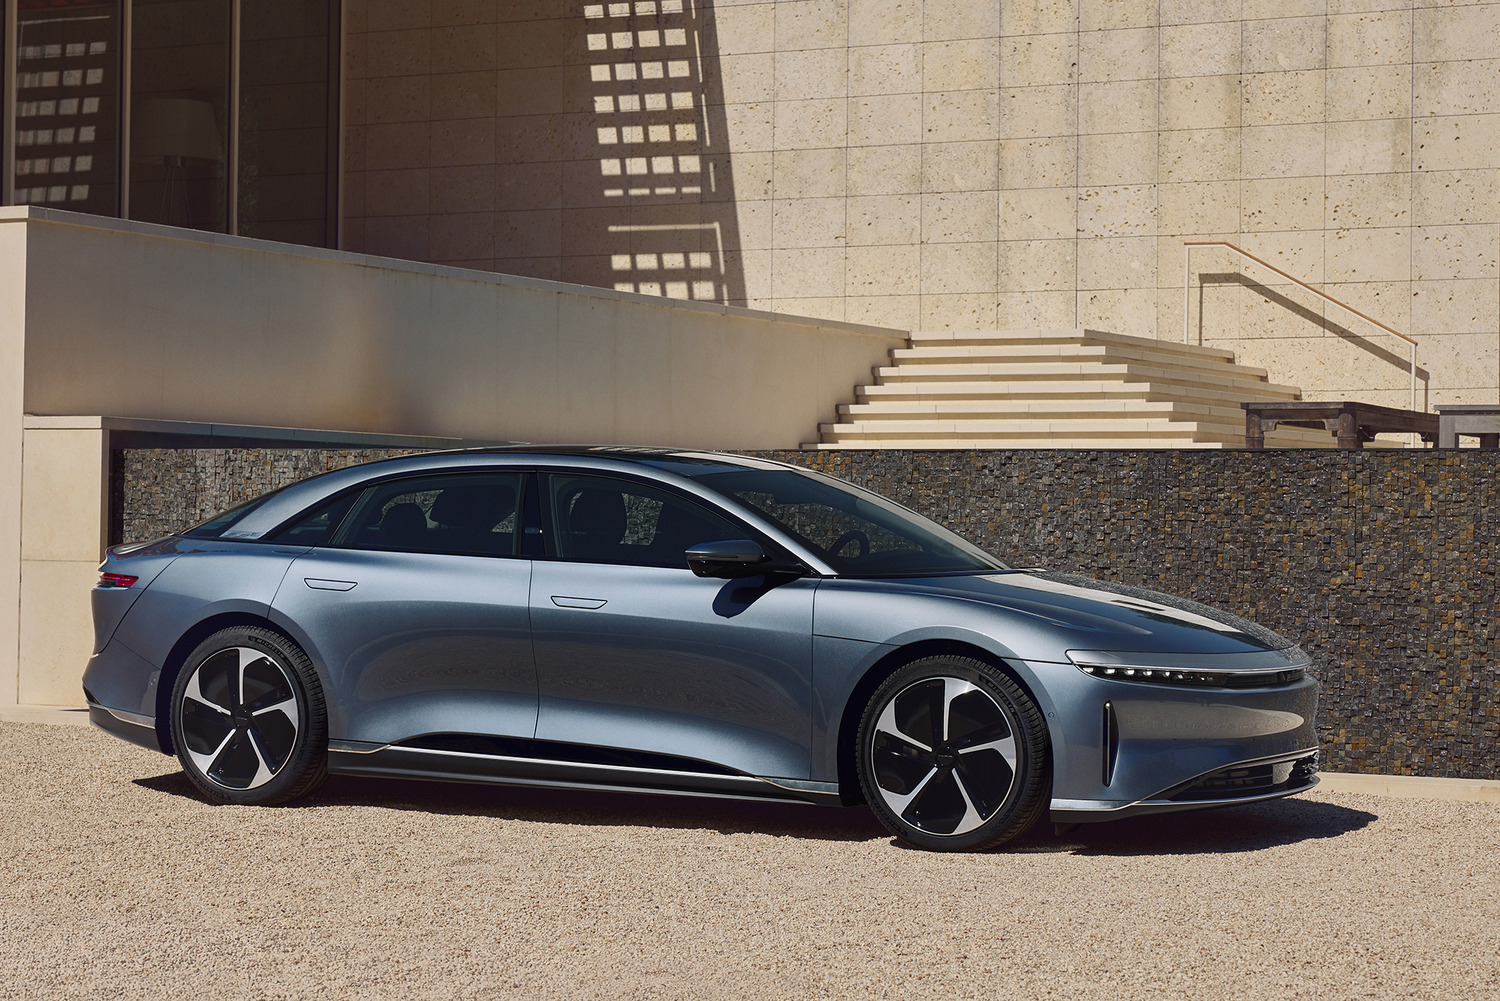 Side view of the Lucid Air Pure, an electric luxury sedan